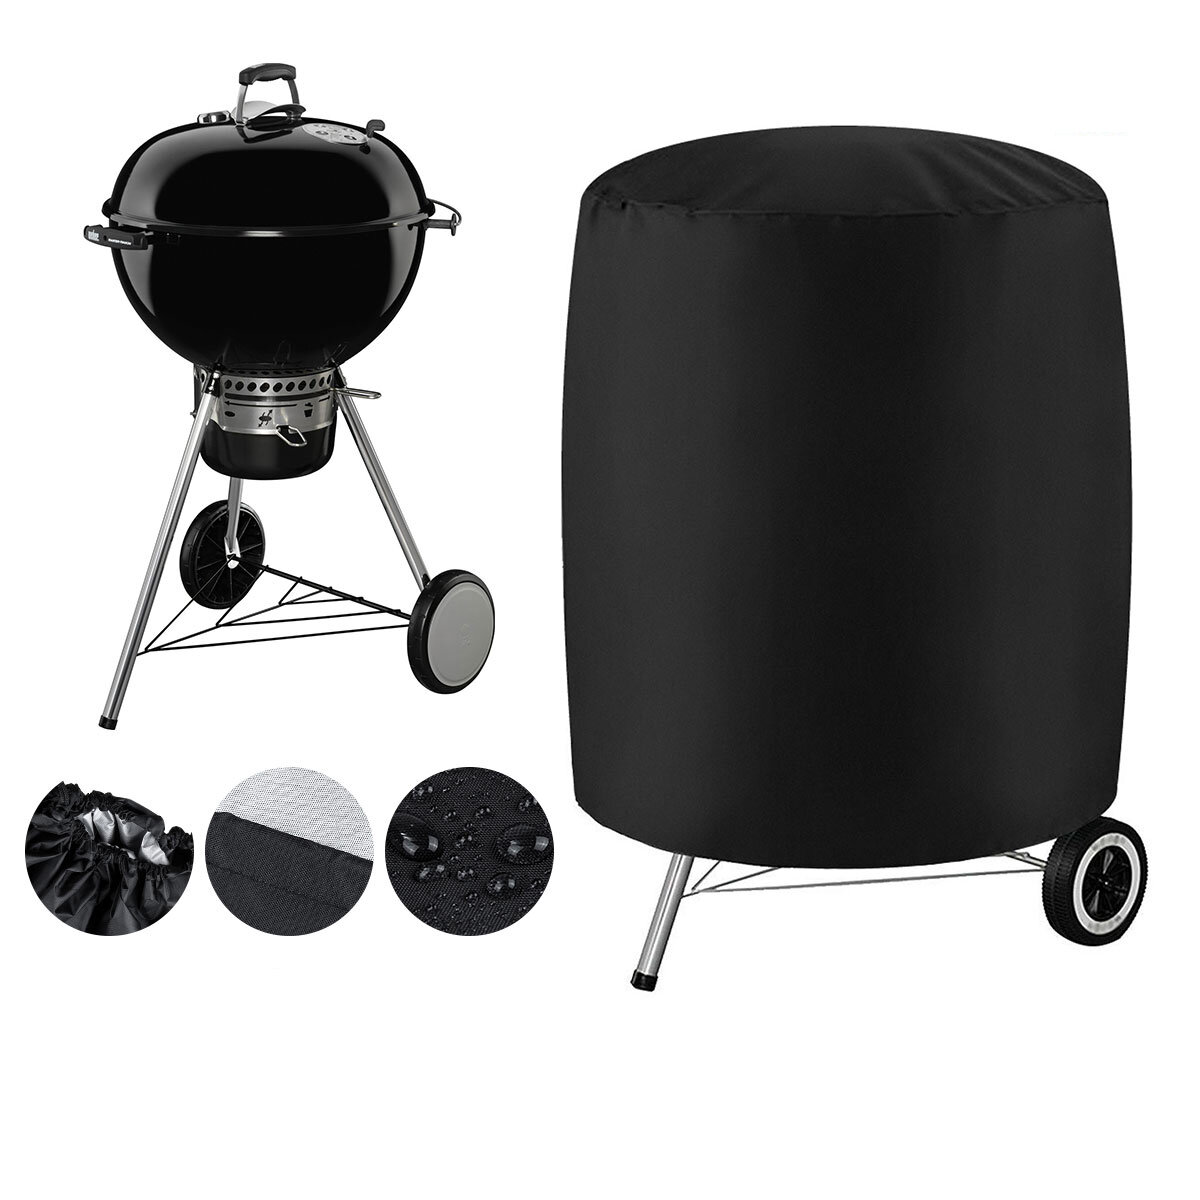 190D Polyester BBQ Stove Grill Cover Garden Patio UV Dust Protector